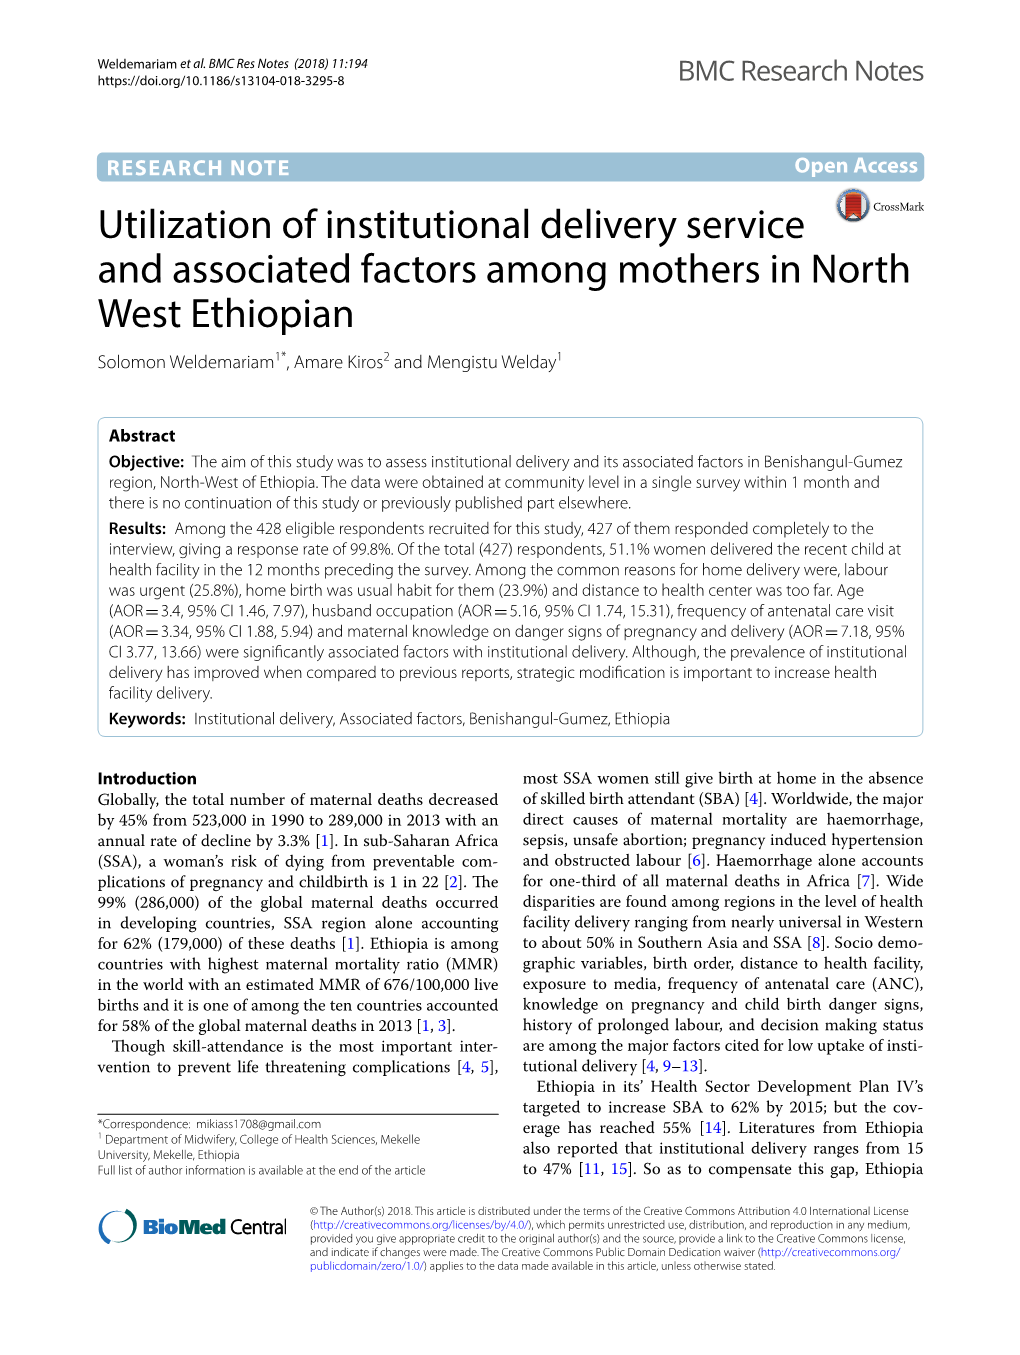 Utilization of Institutional Delivery Service and Associated Factors Among Mothers in North West Ethiopian Solomon Weldemariam1*, Amare Kiros2 and Mengistu Welday1